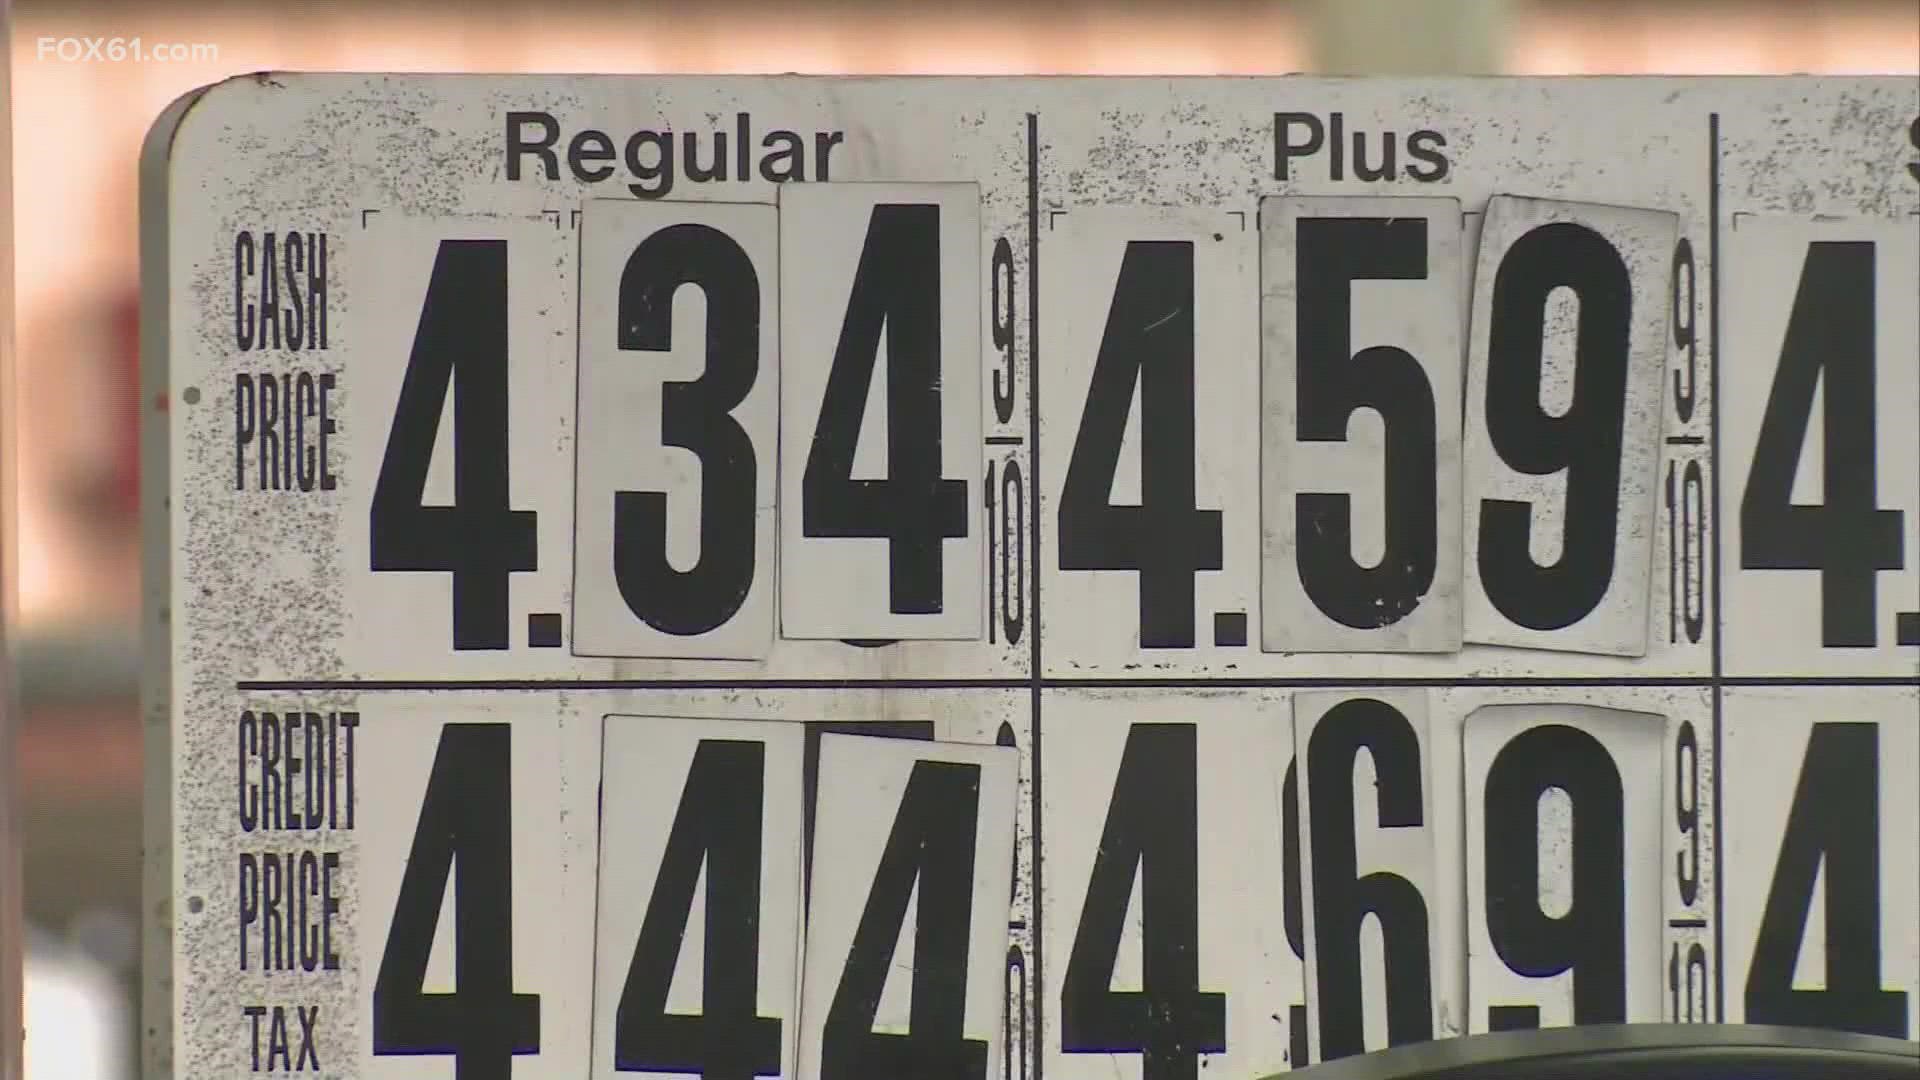 Connecticut drivers are noticing a welcome change: gas prices are down after weeks of prices upwards of $4.00 per gallon.